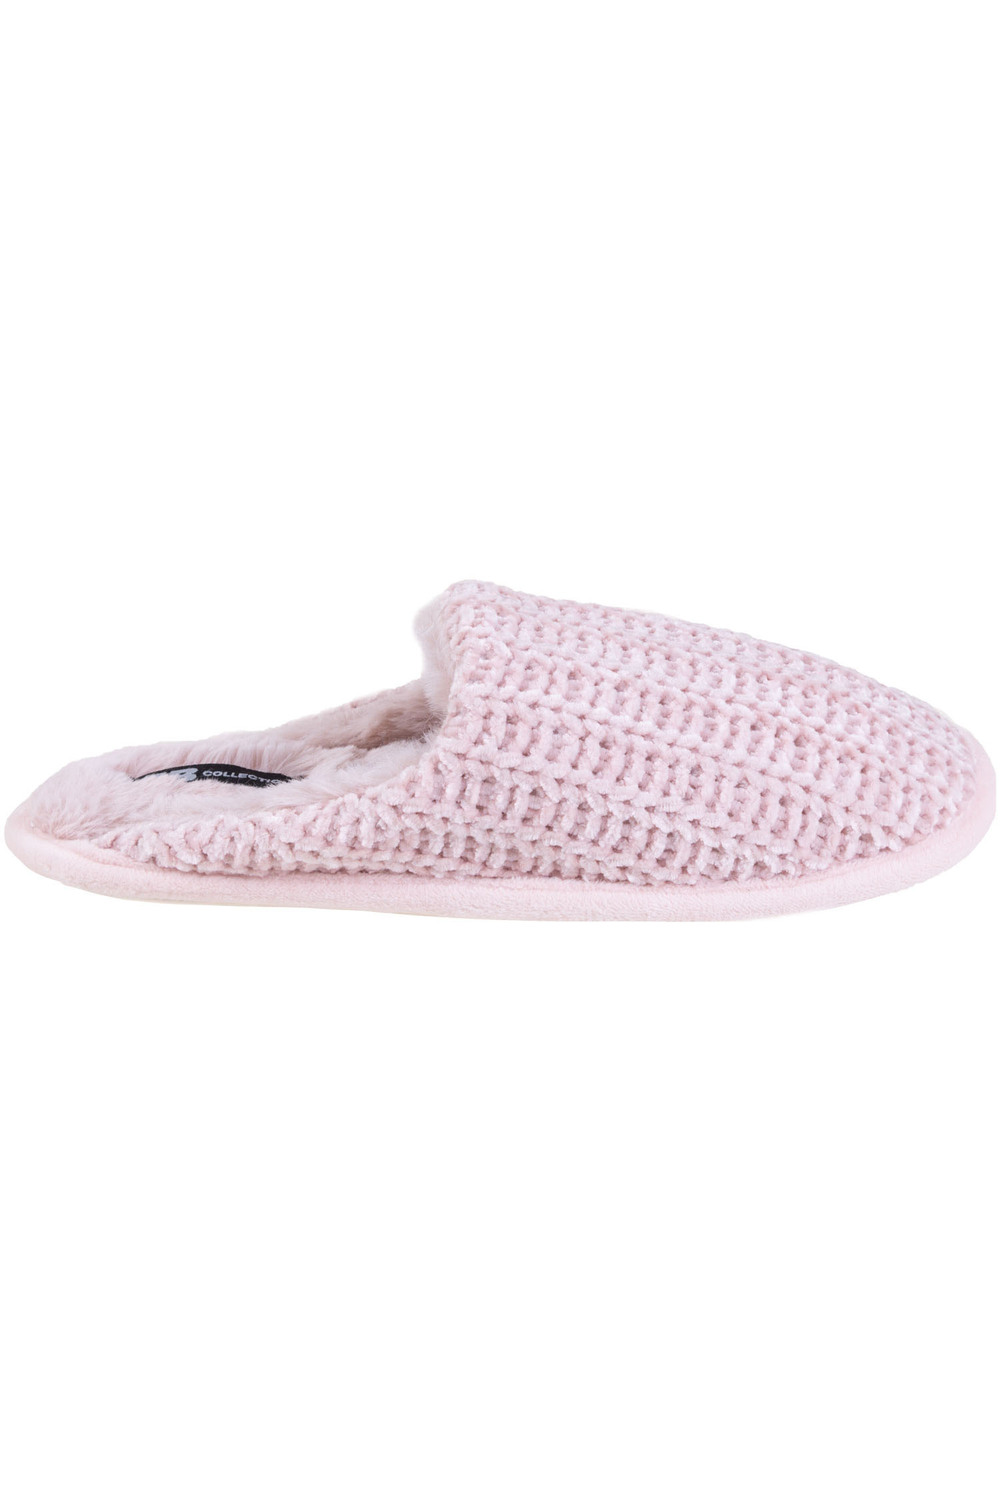 Chenille knit open back slippers, pink, medium (M)